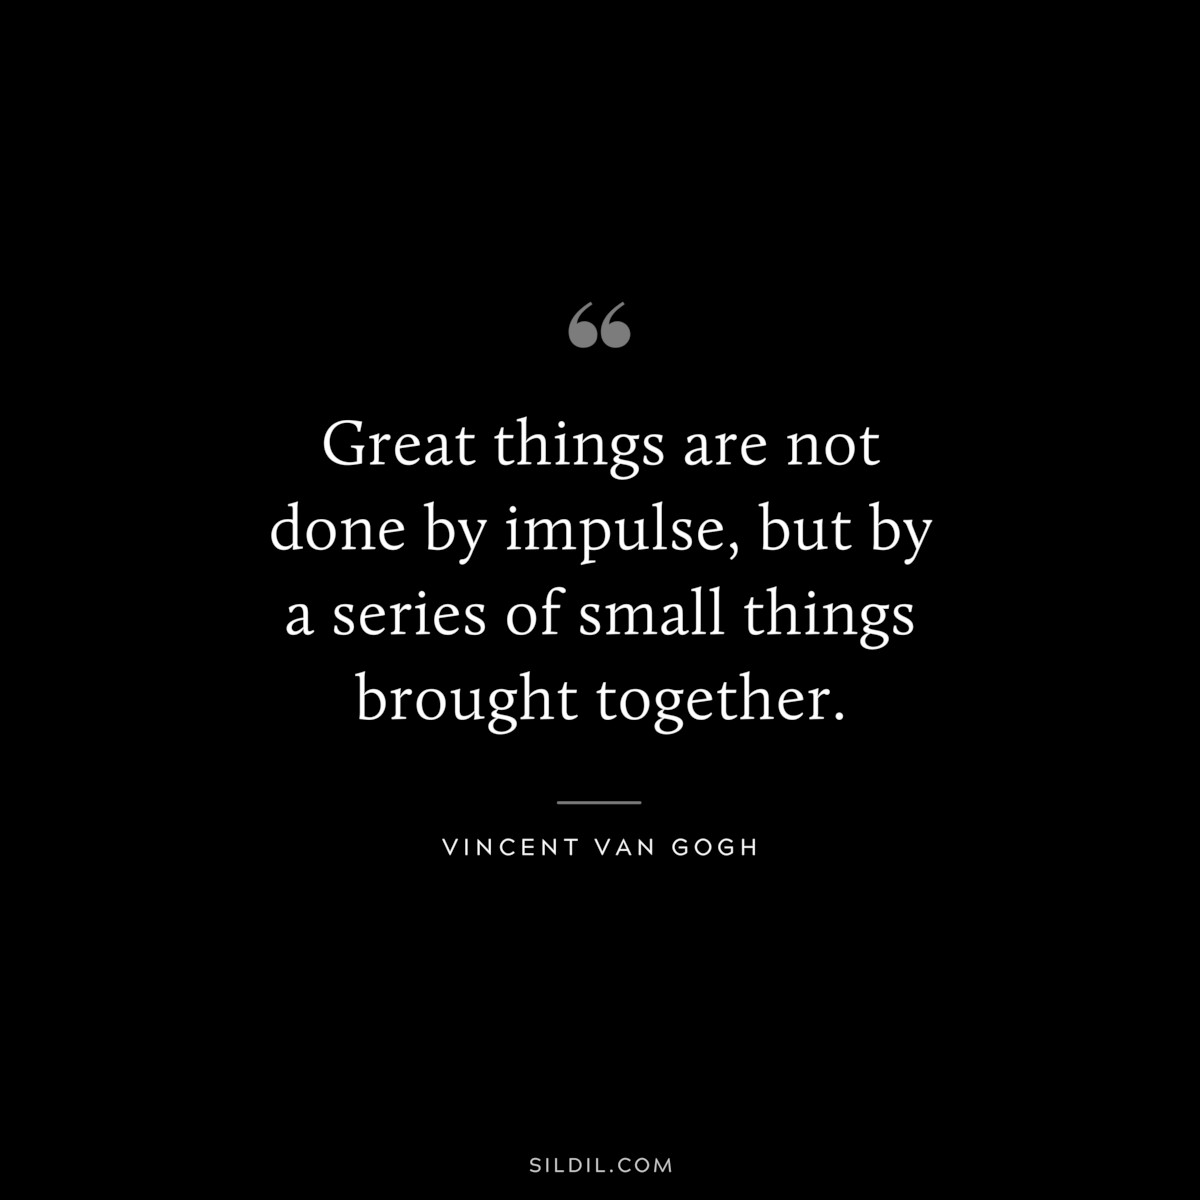 Great things are not done by impulse, but by a series of small things brought together. ― Vincent van Gogh